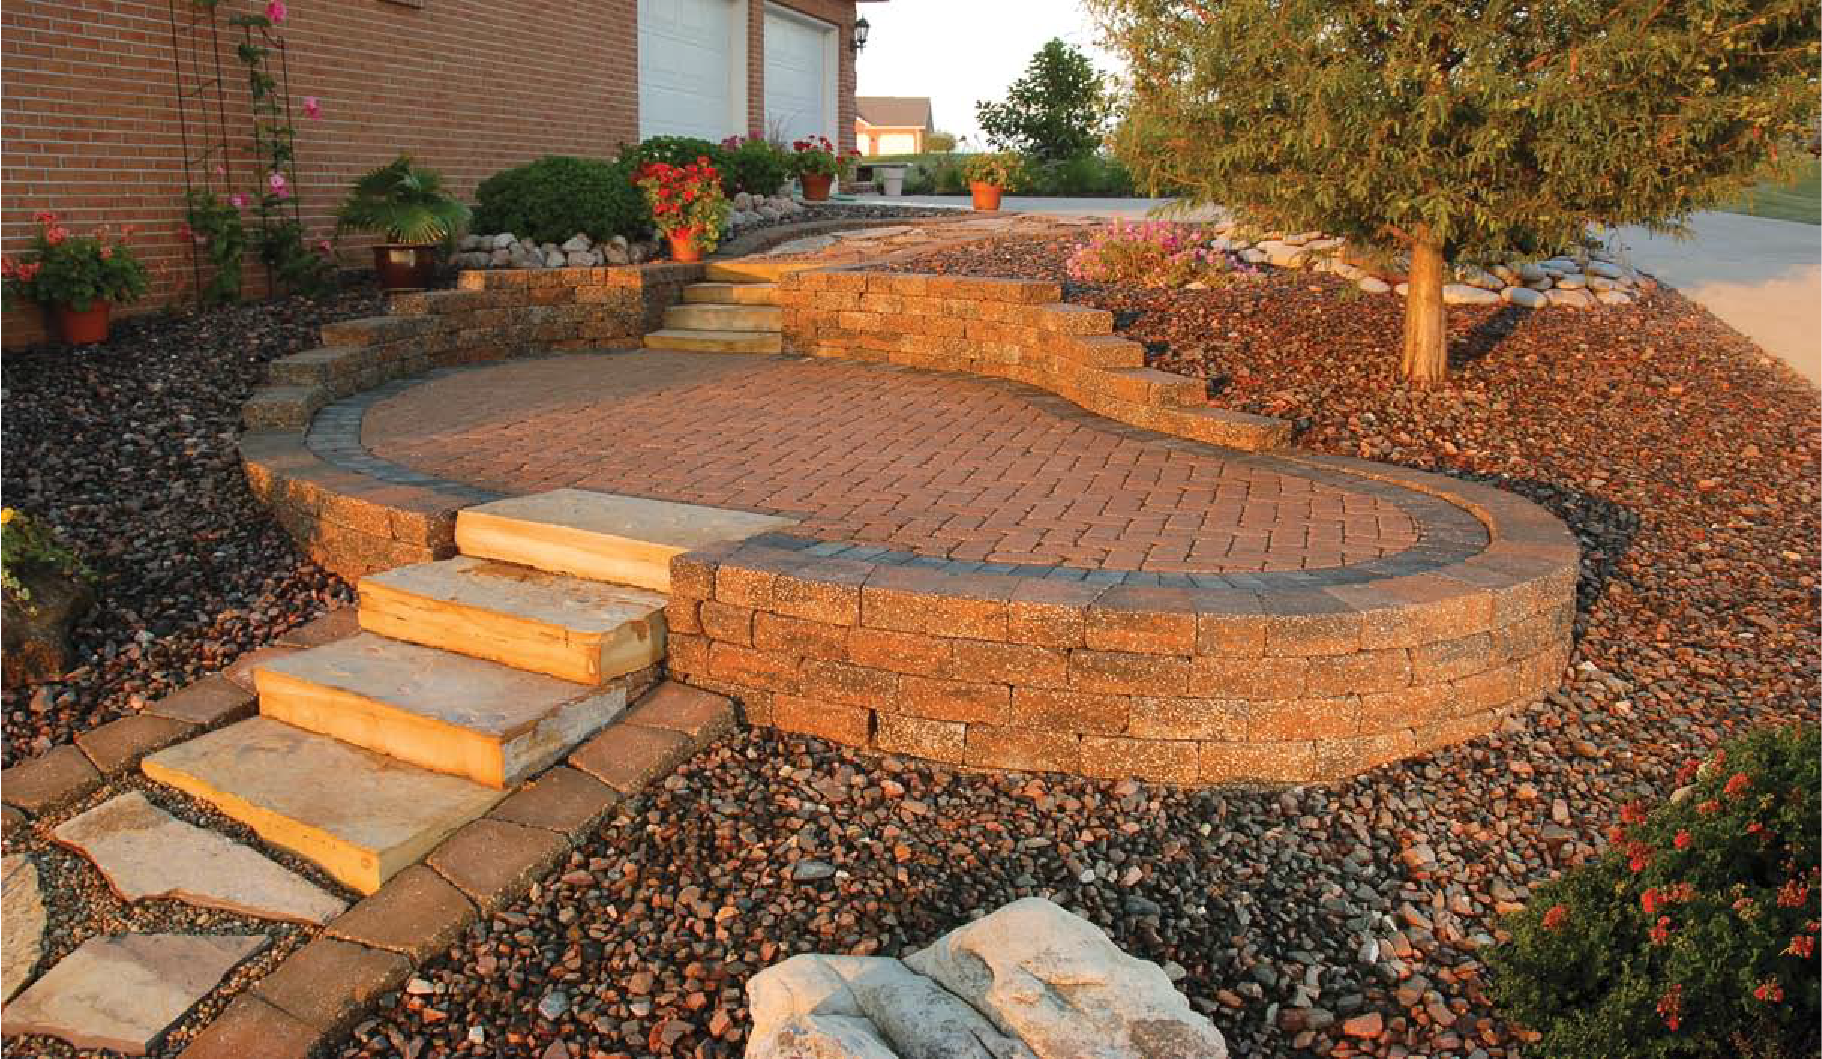 Stockman Stoneworks Can Help You With All of Your Gardening & Landscape Troubles in Missouri.